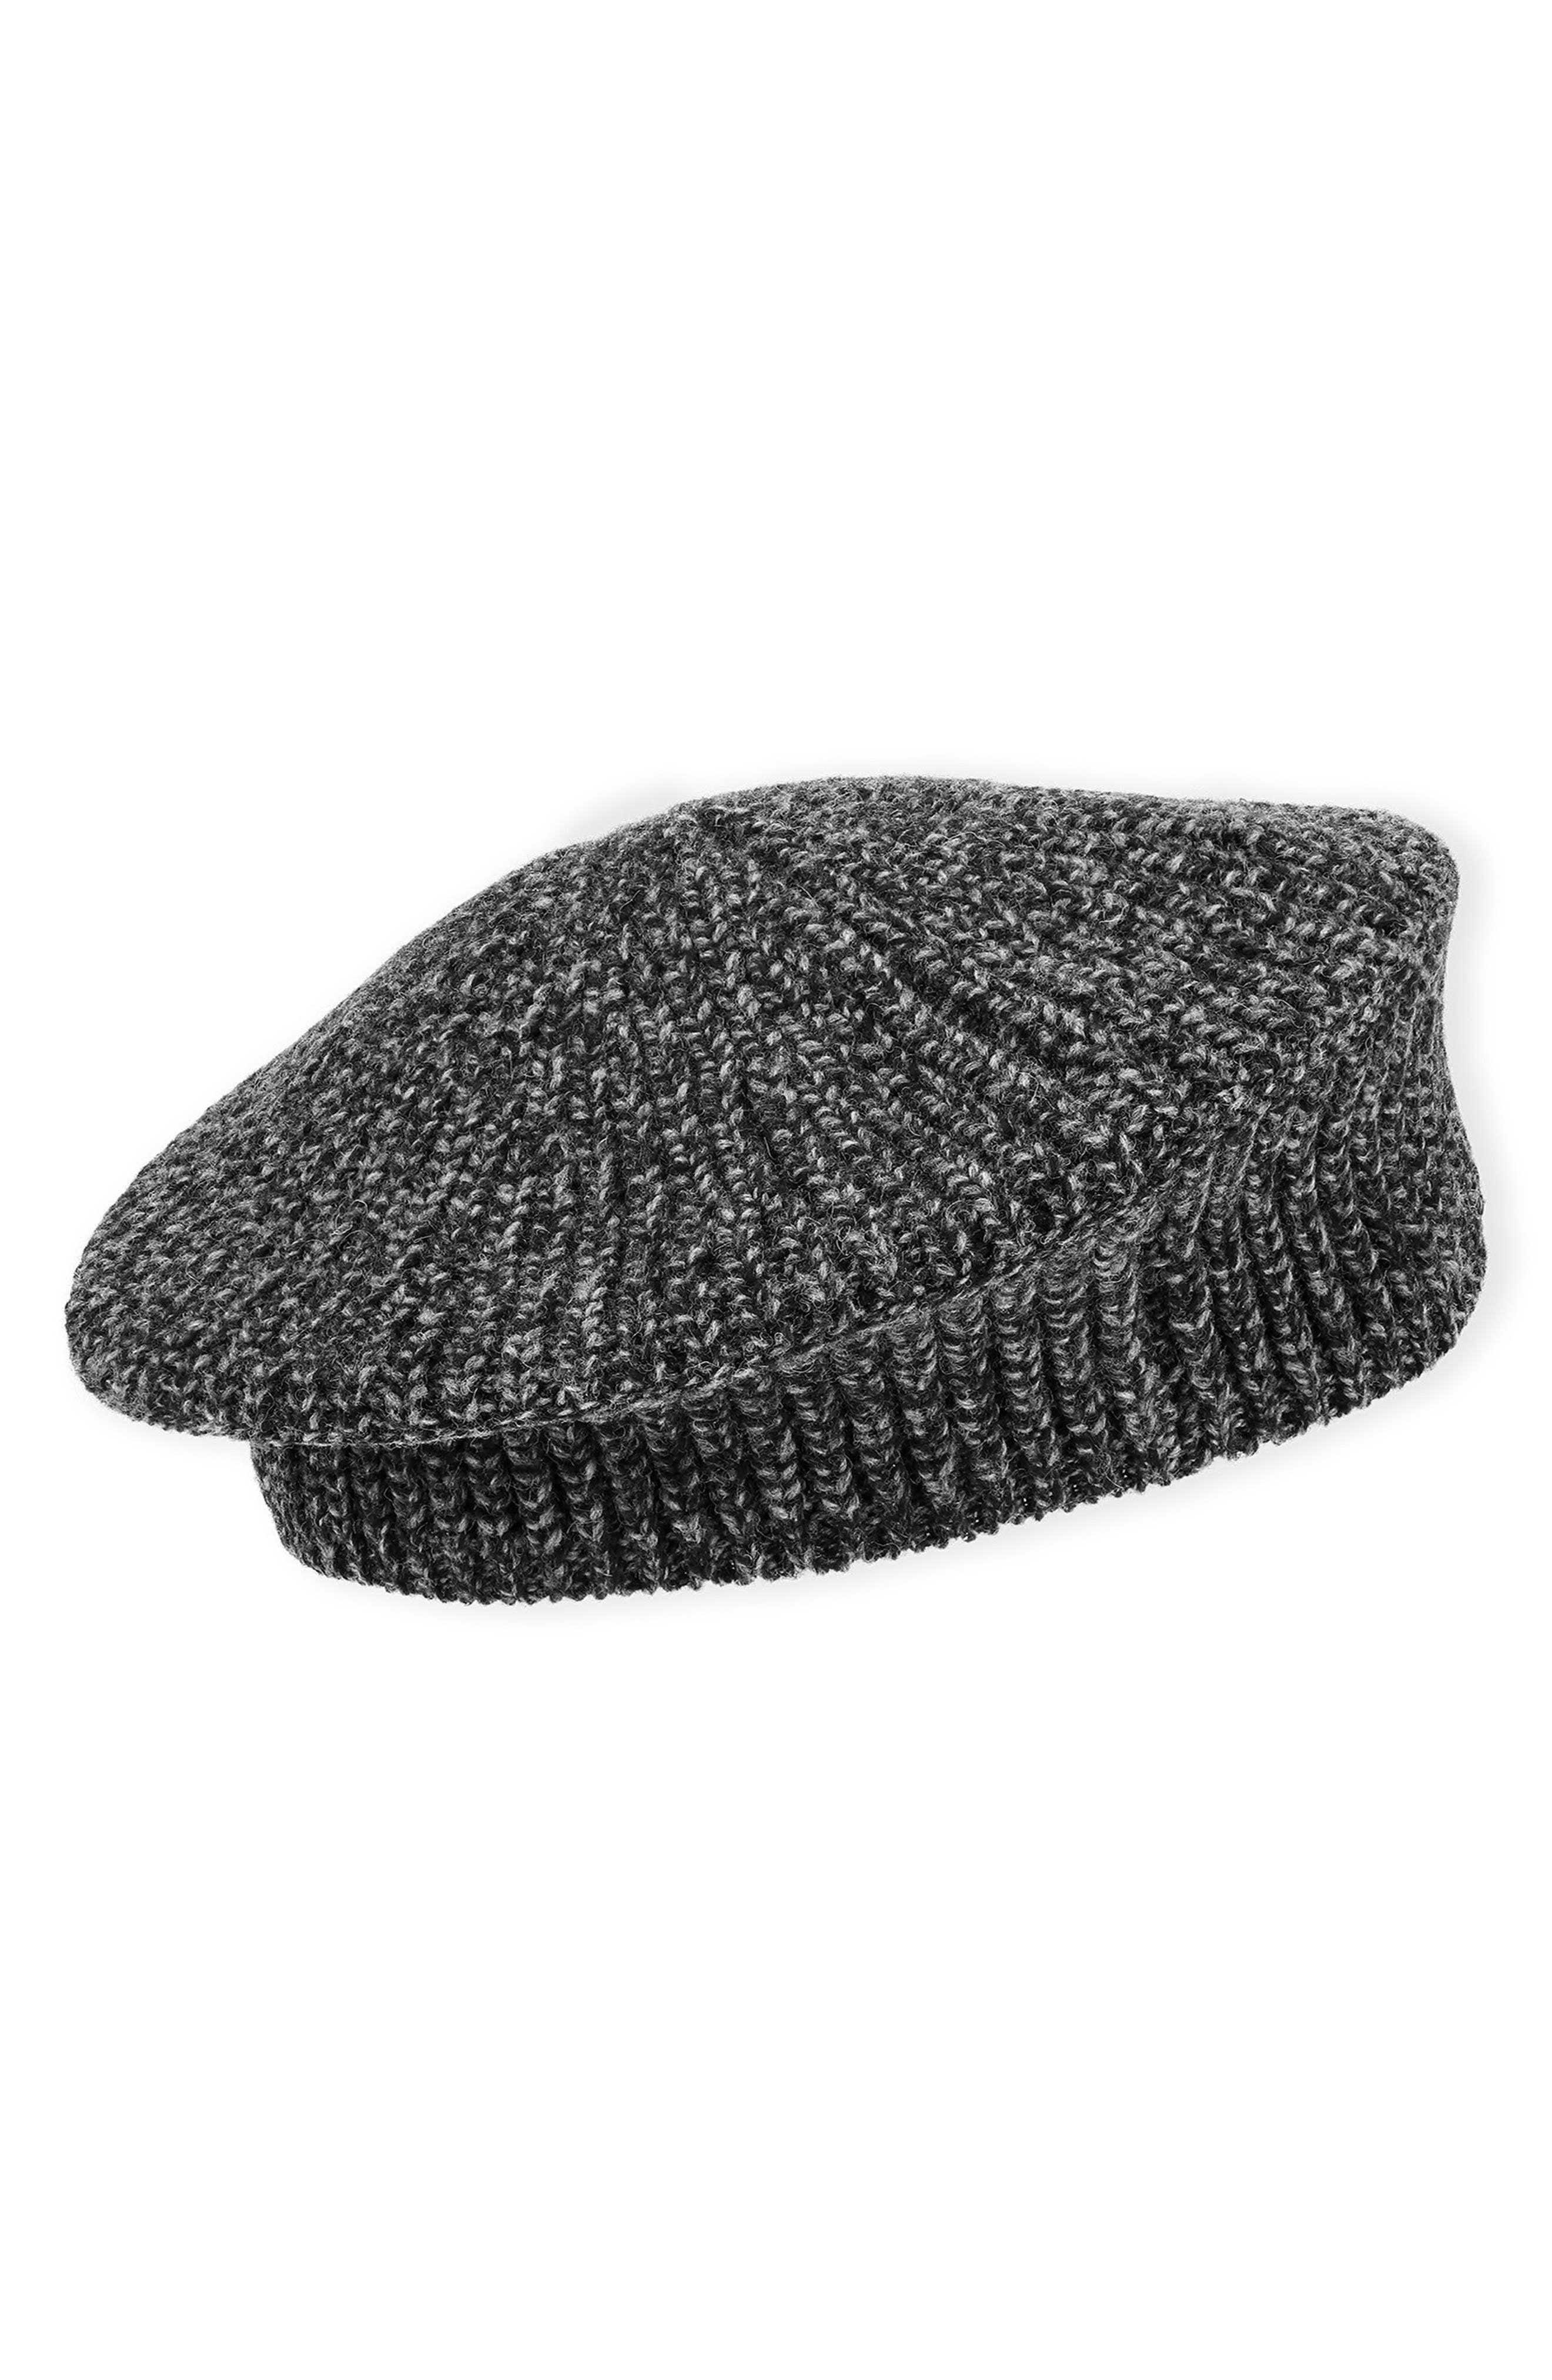 YSense 2 Pack Flat Cap Gift for Father Classic Winter Hats for Men